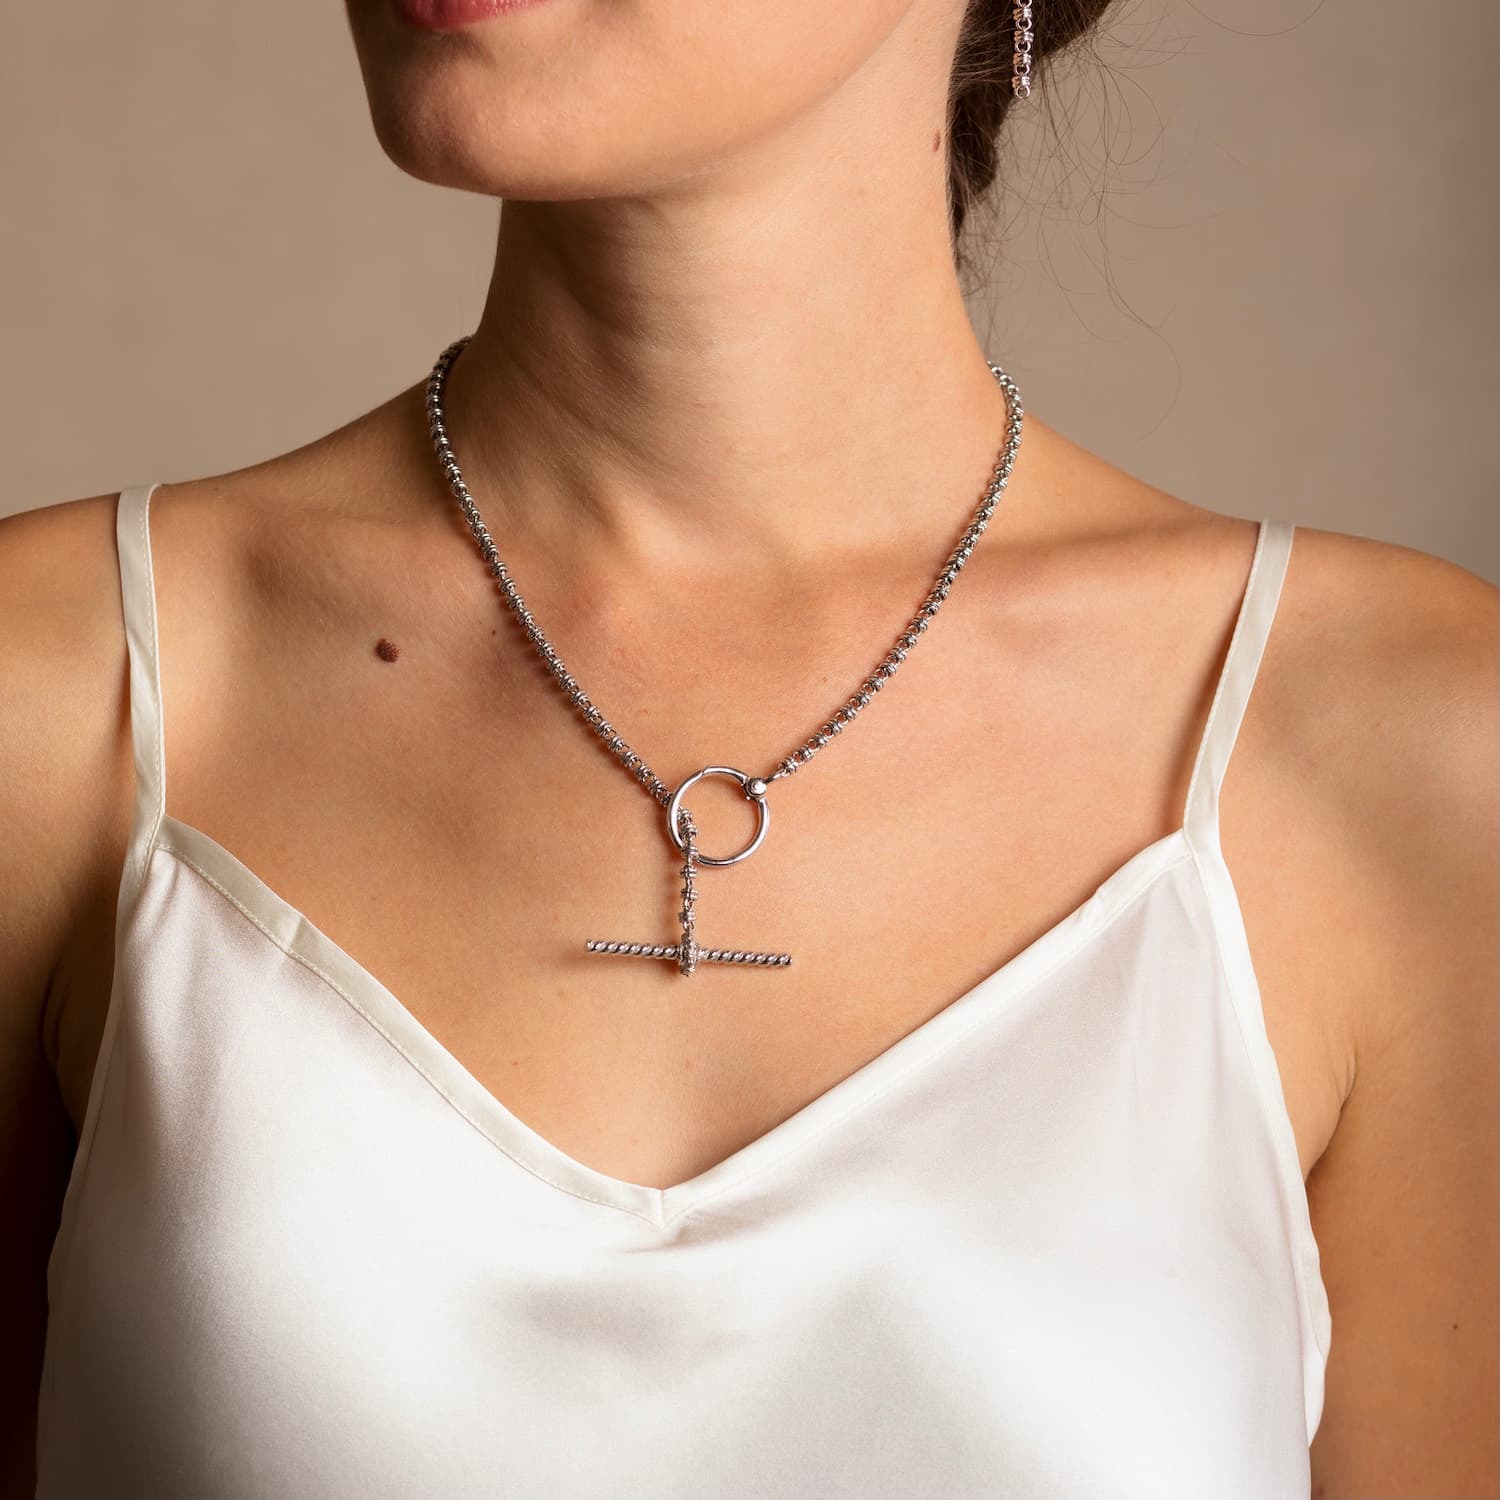 A person modeling a silver necklace with a toggle clasp and silver earrings to match the silver chain in the necklace - both from the Links 3mm collection from DelBrenna Italian Jewelry designers and artisans. Hand-crafted in Tuscany.